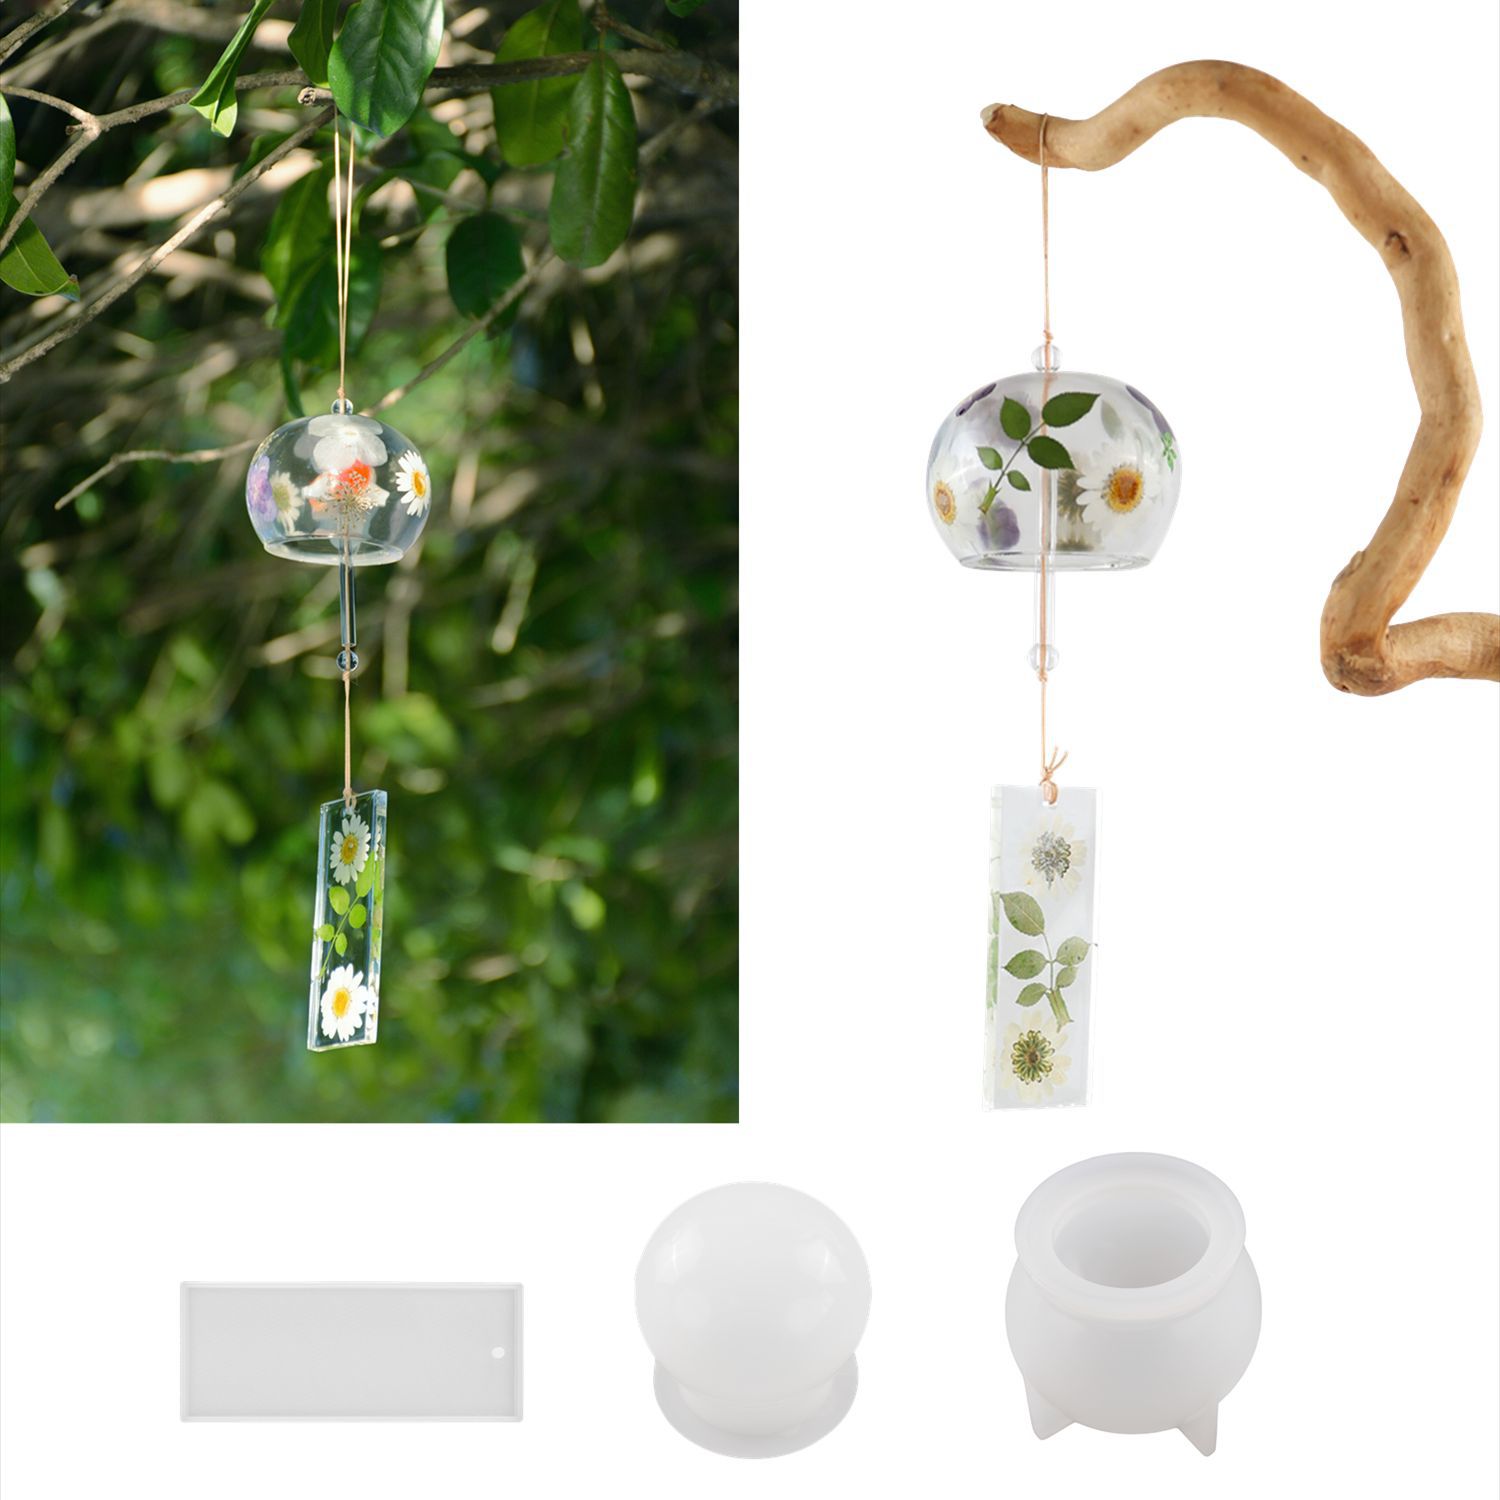 Silicone Wind Chime Molds Home Decor Resin Craft Supplies